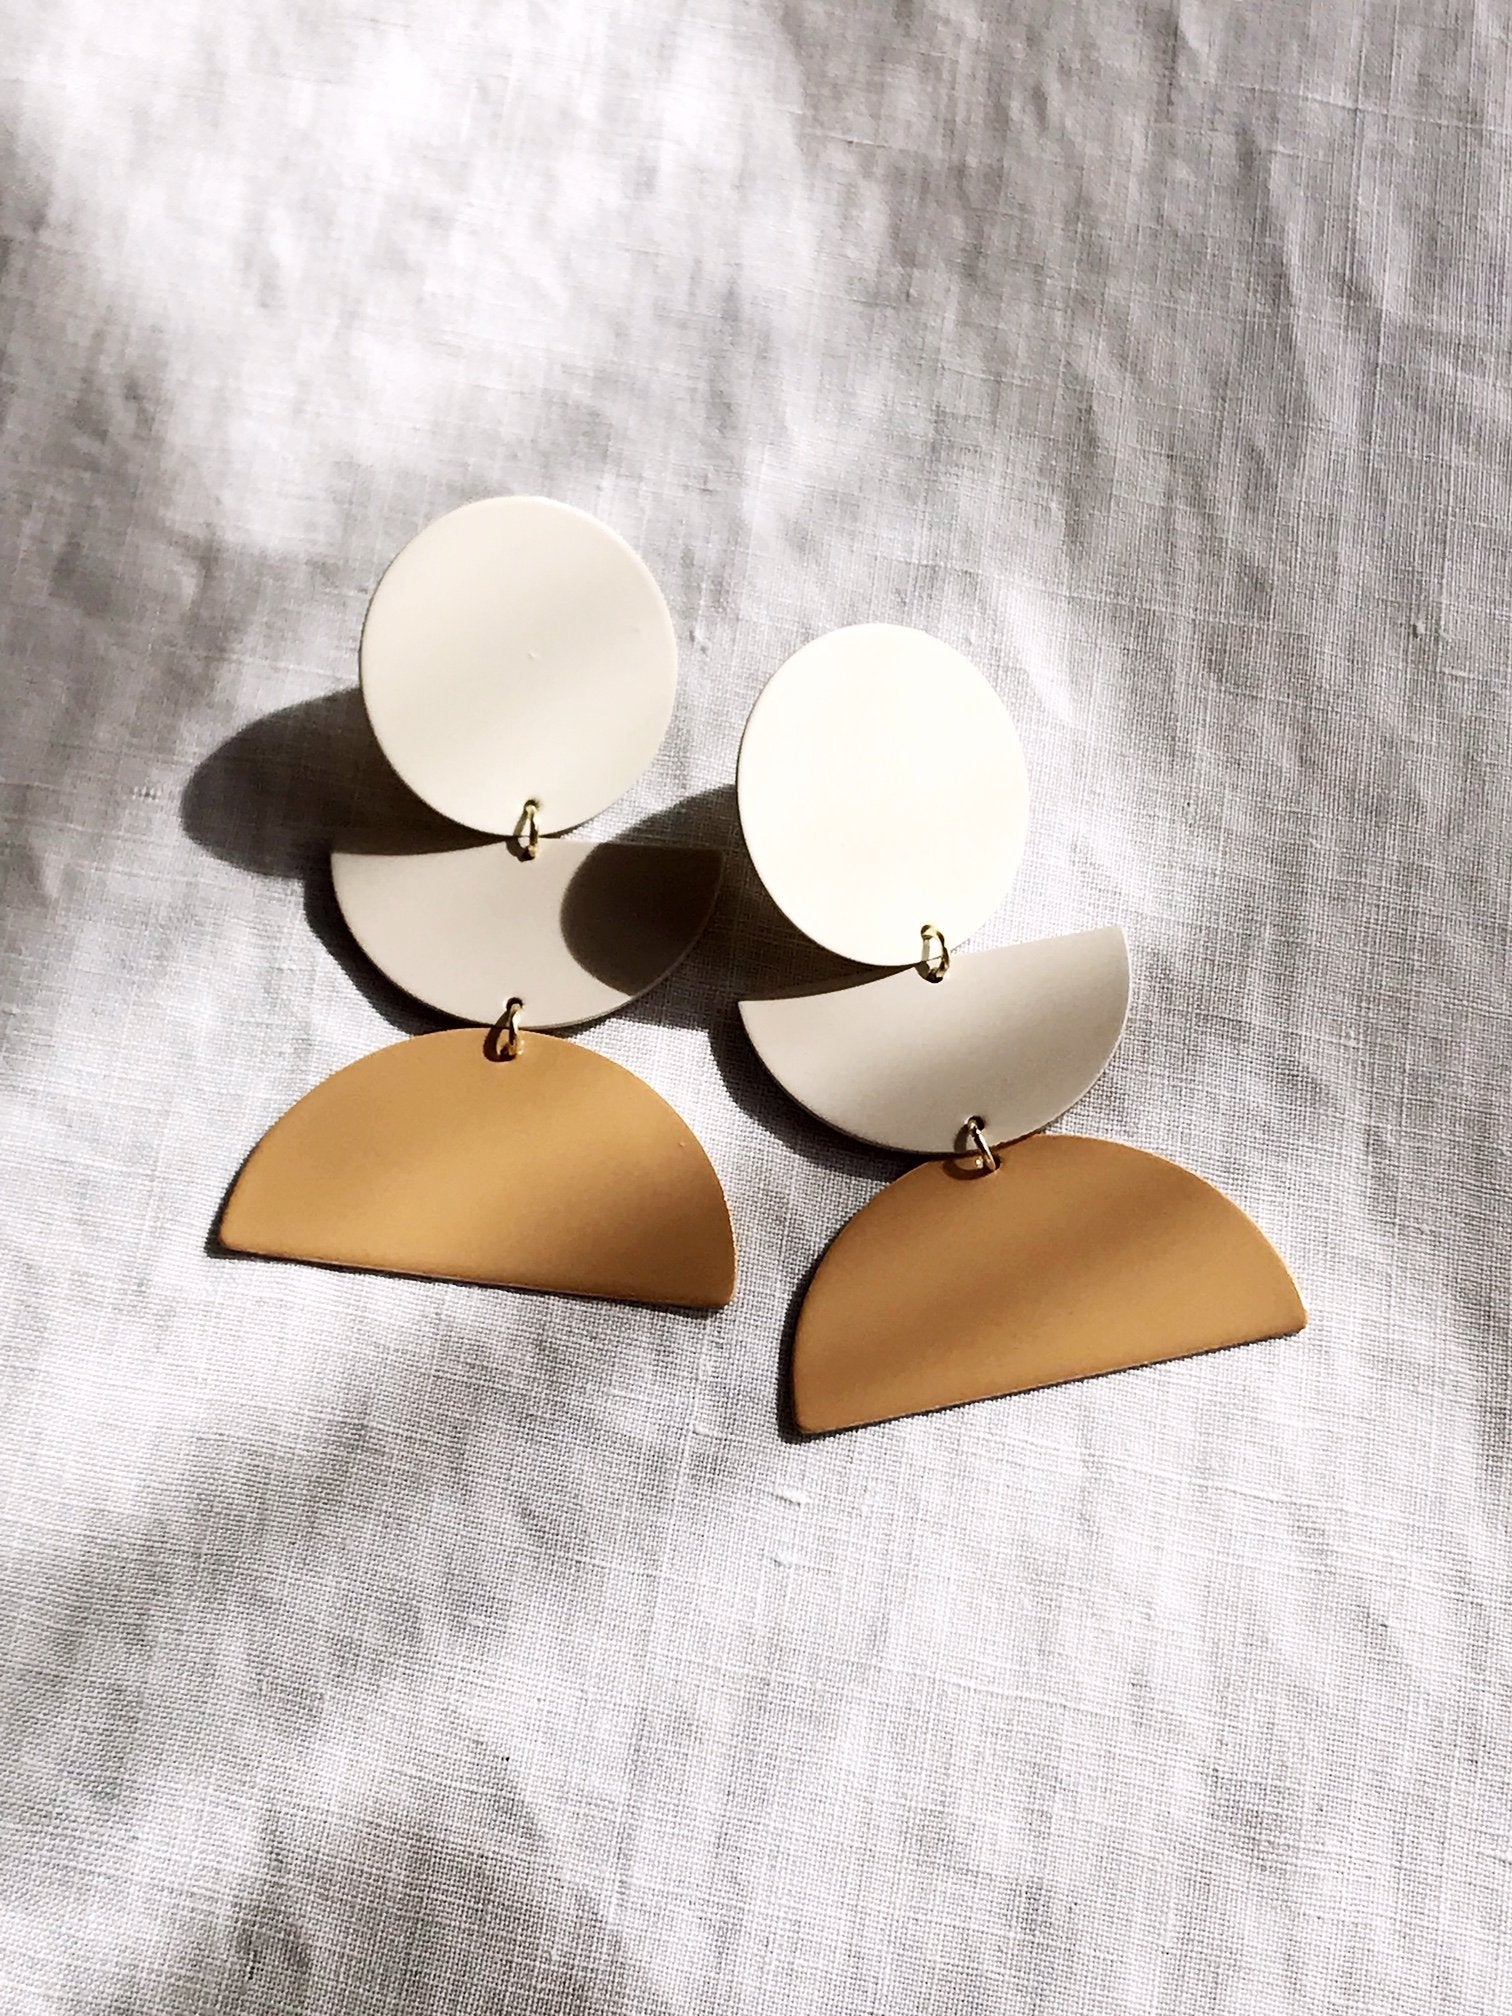 The Sunset Earrings by Pearl and Ivy Studio